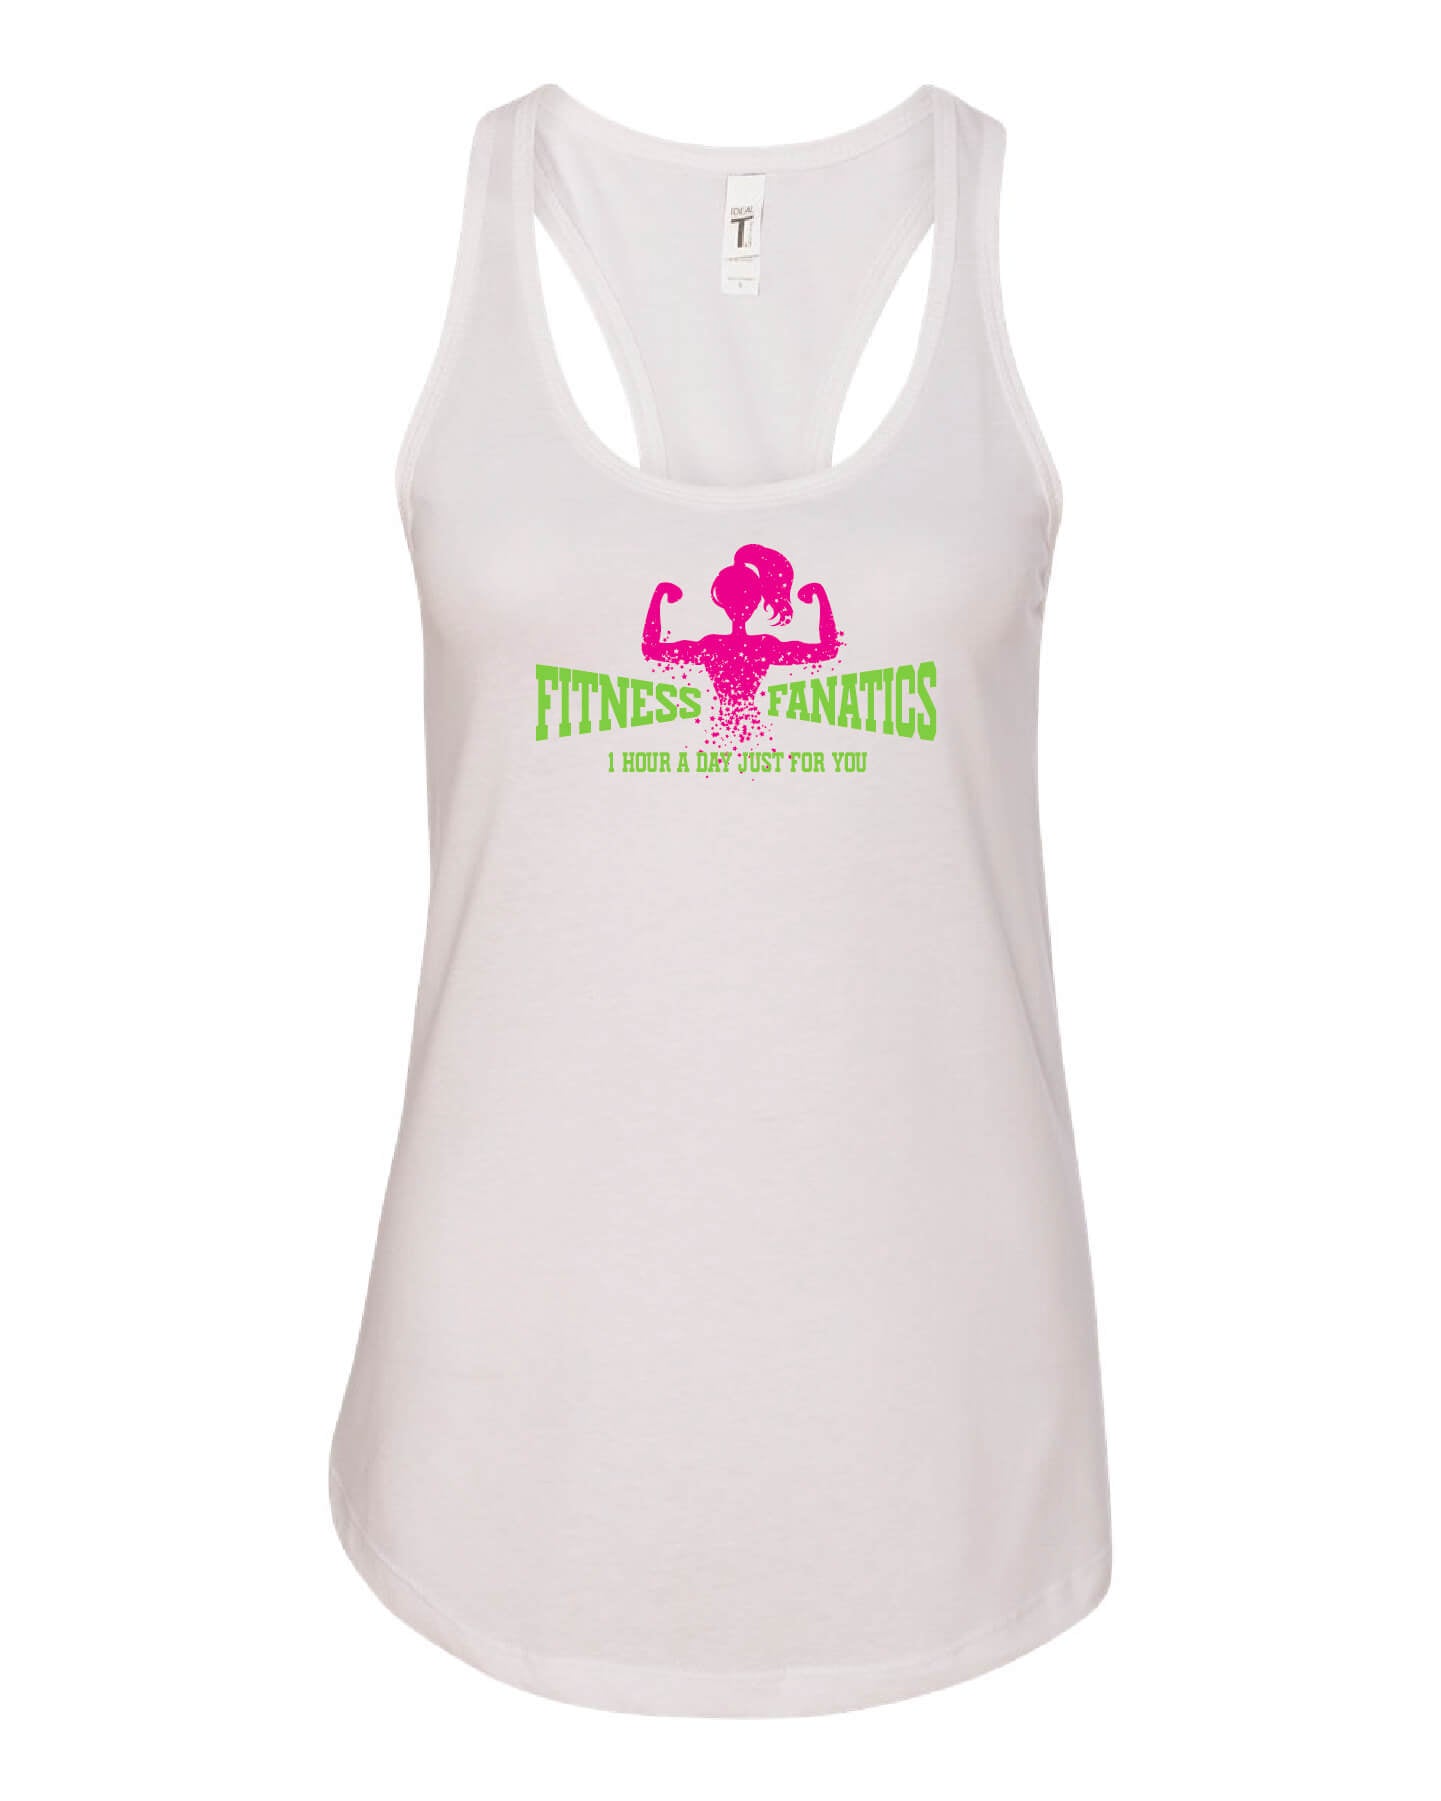 Womens Racerback Tank white with pink